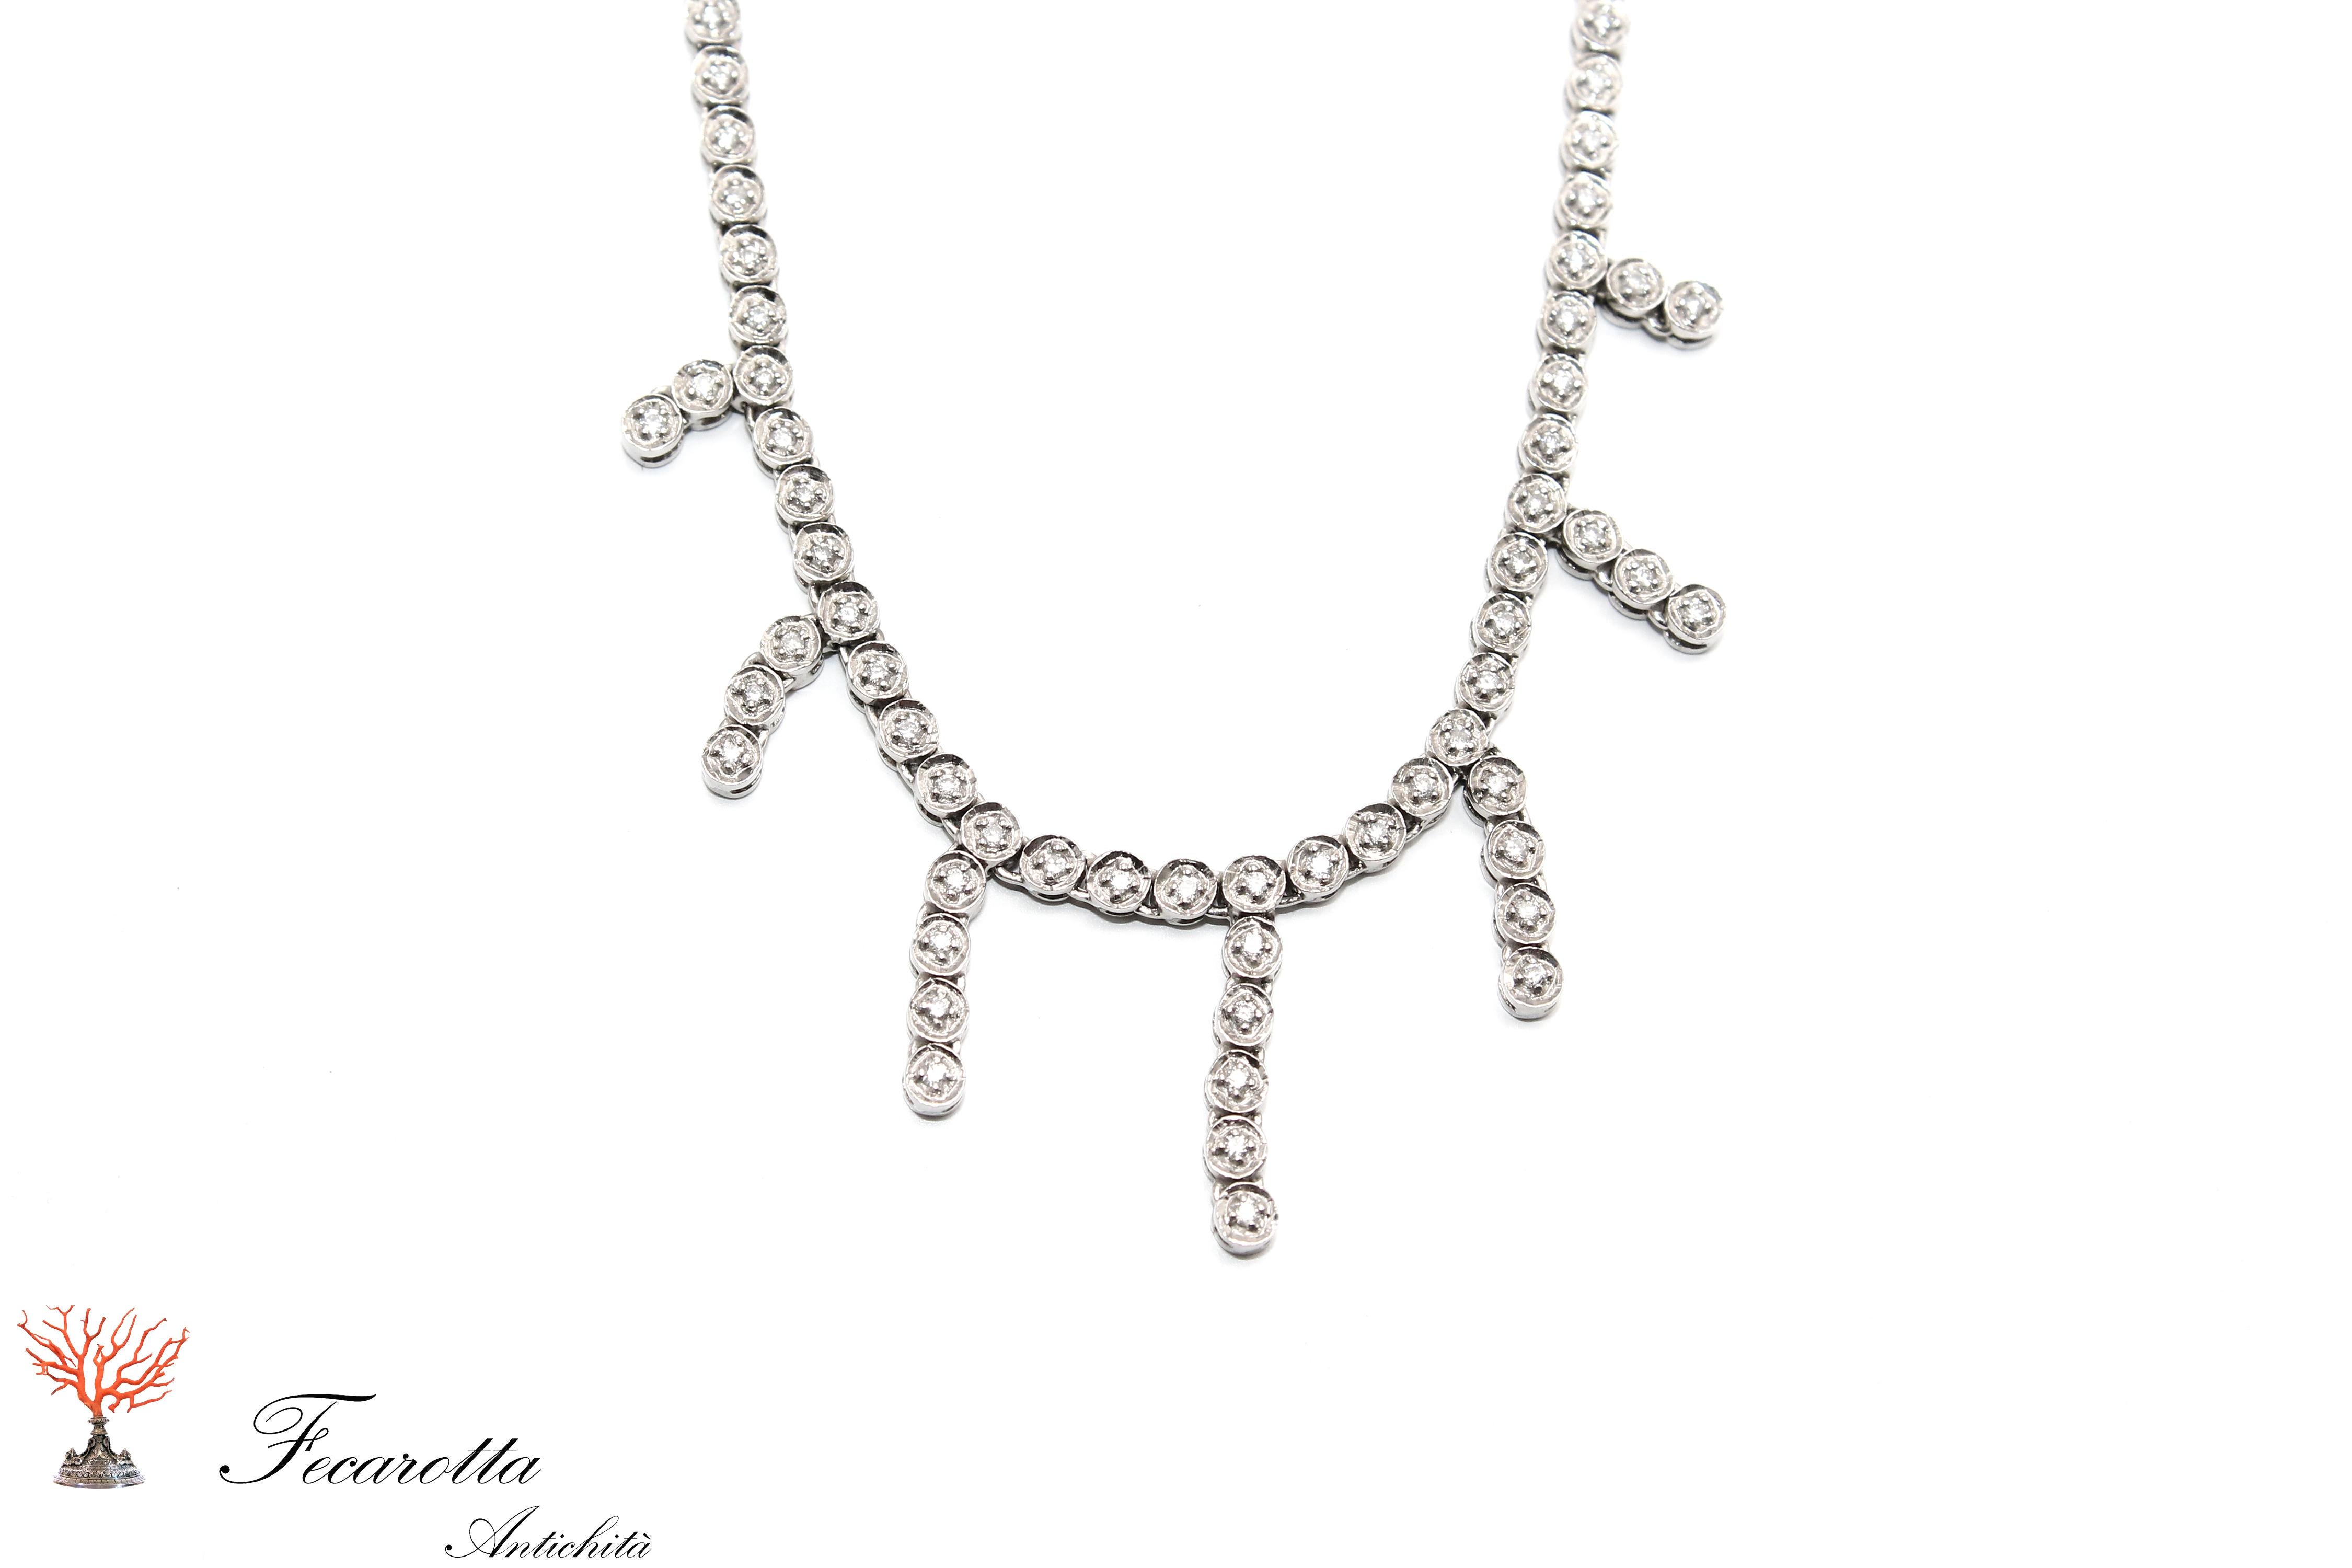 18 kt white gold choker necklace with pendant.
 total 1.20 ct diamonds colour G-Vs1. Made in Italy

